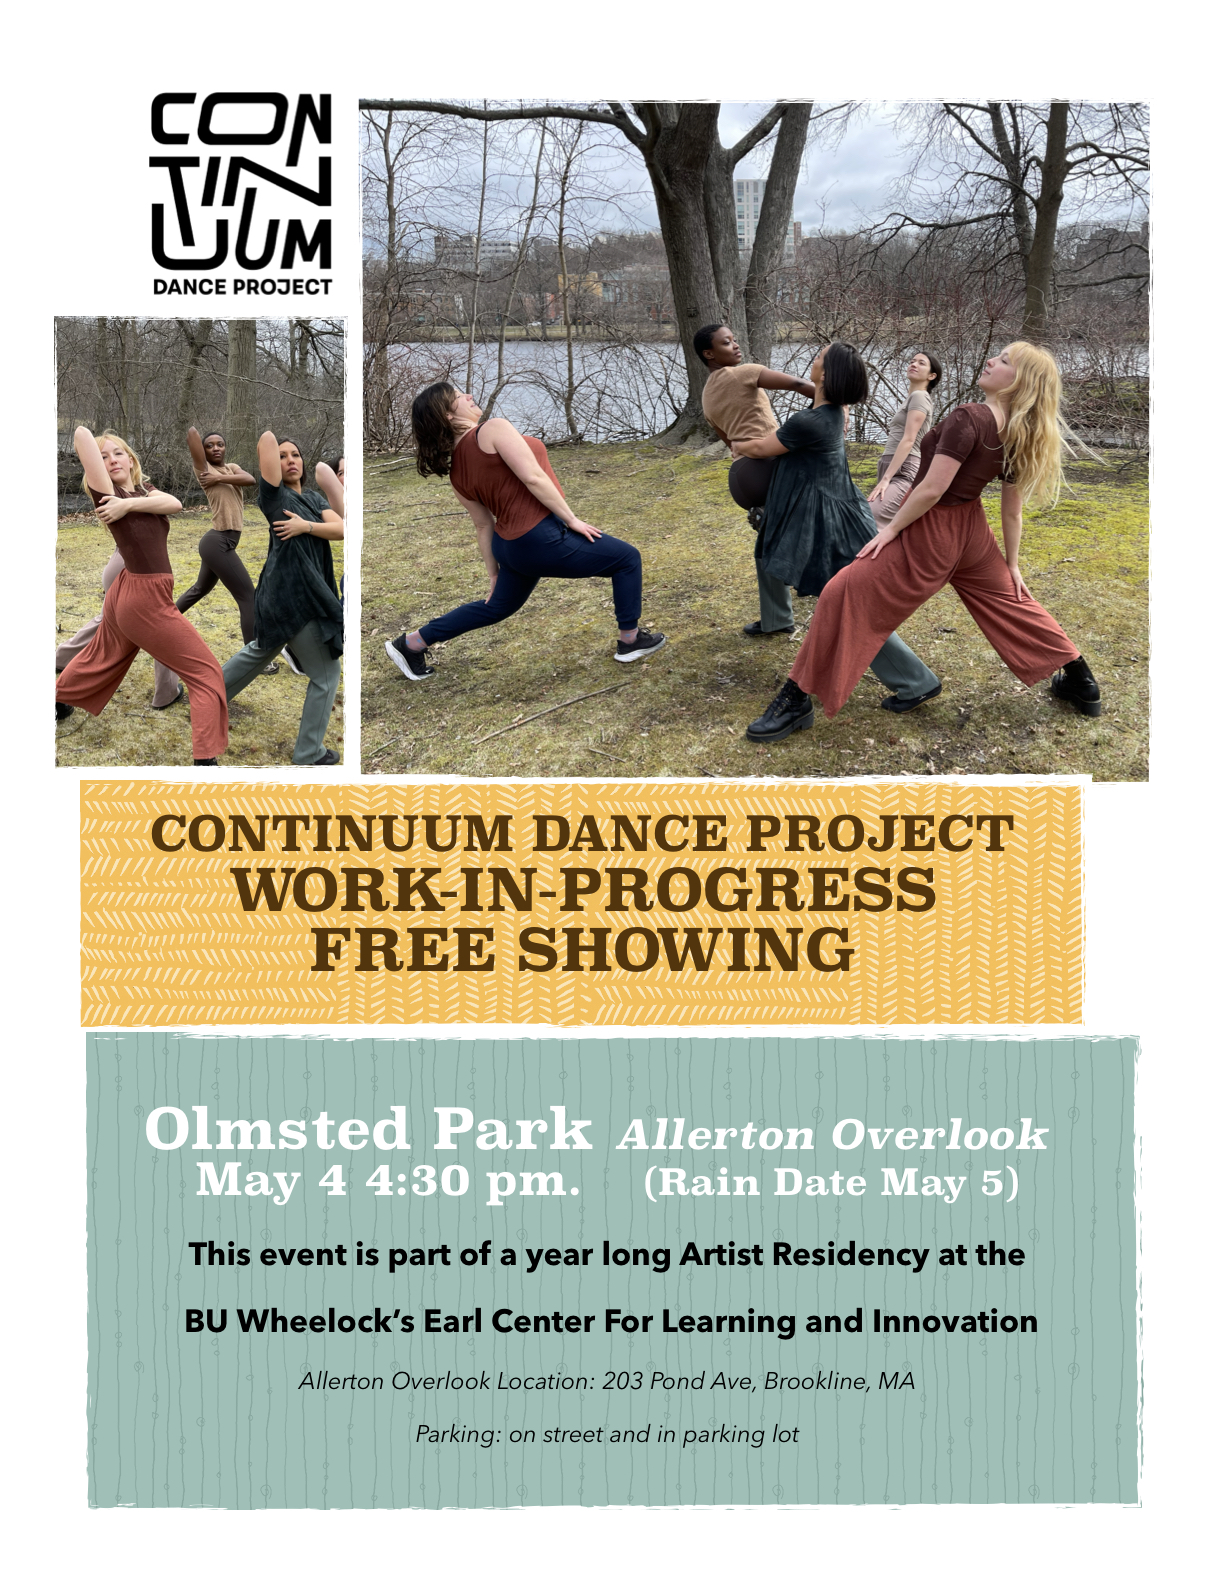 Showing poster with photos of company outdoors dancing with event information